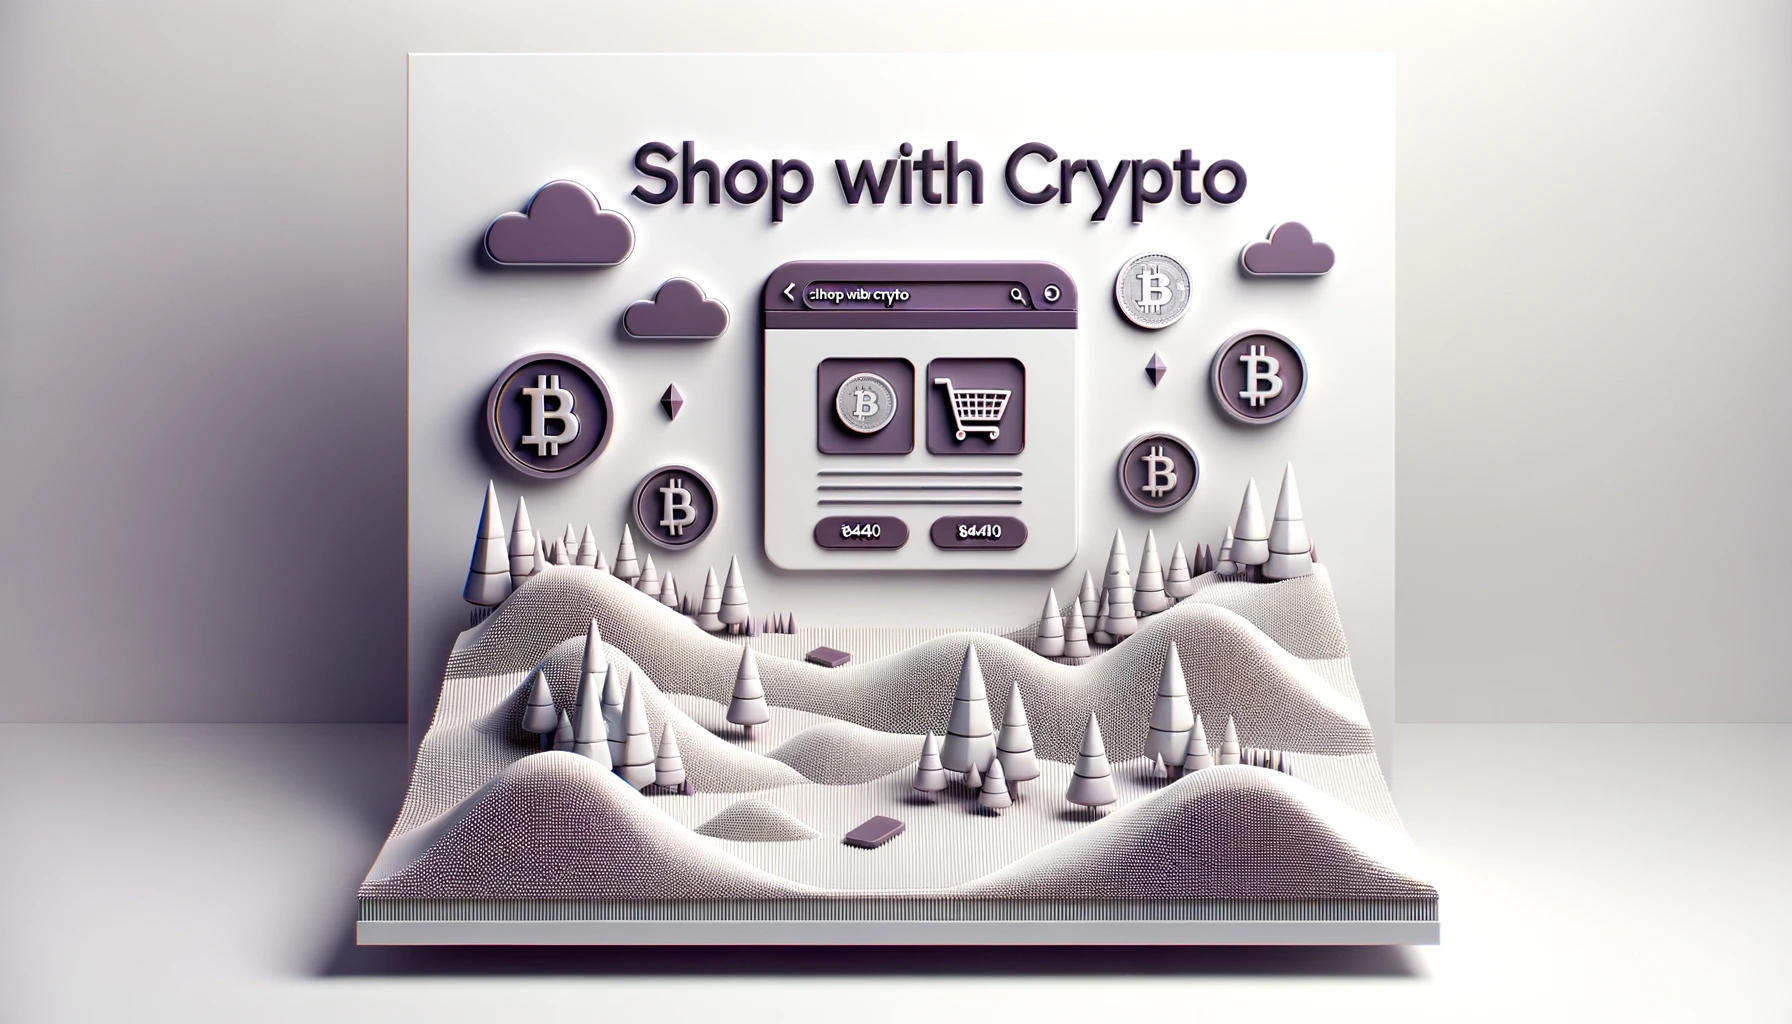 Crypto and ecommerce niches